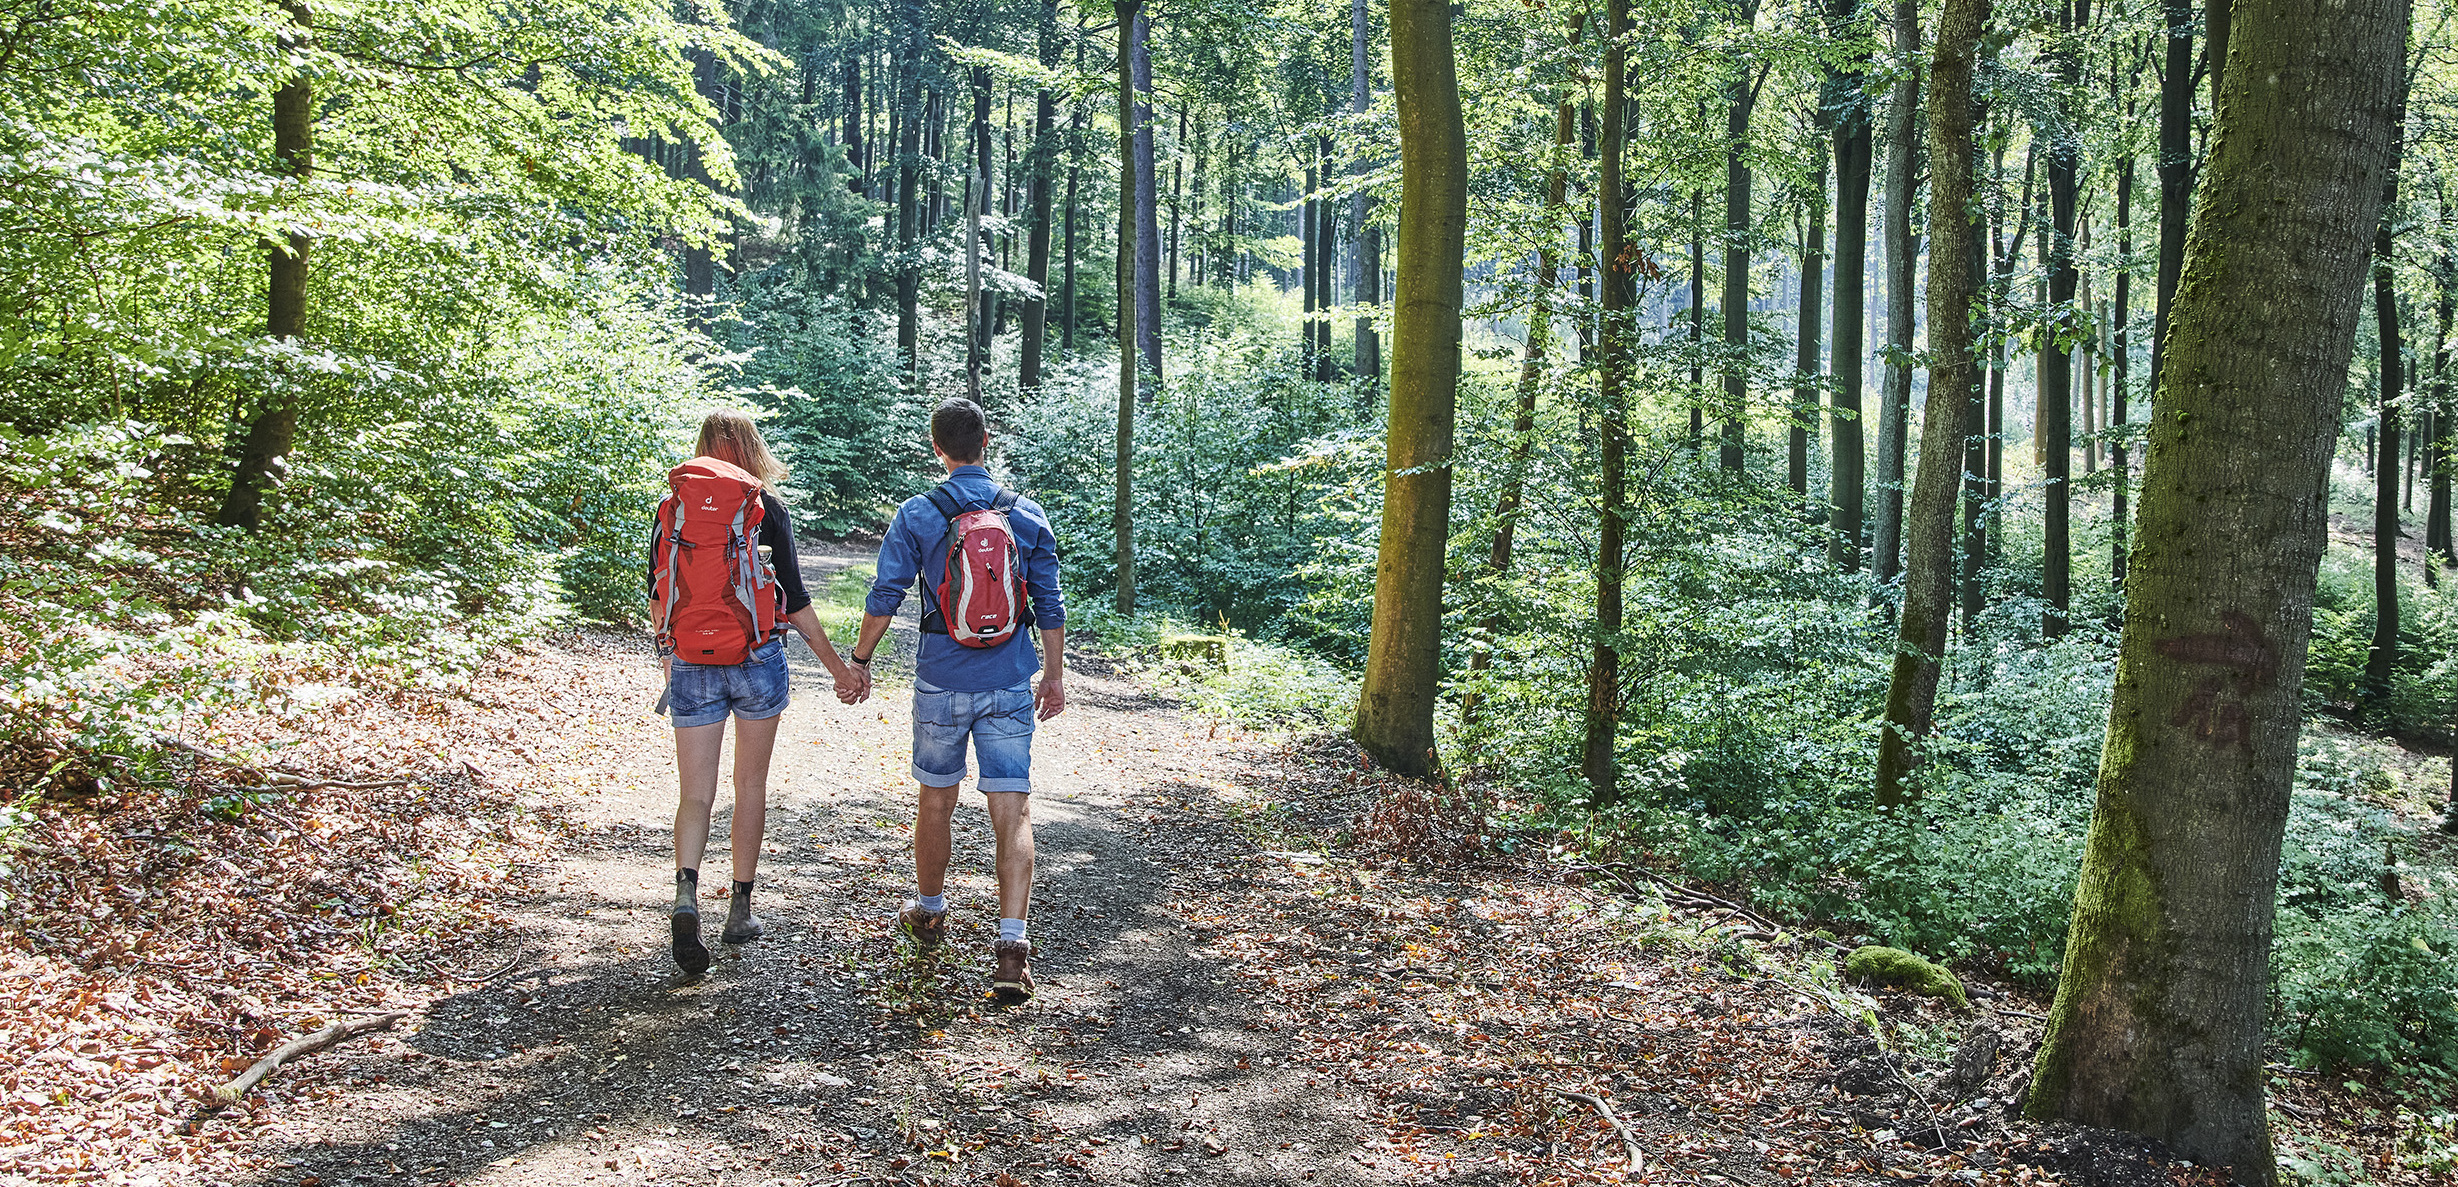 Two people from behind on a forest path